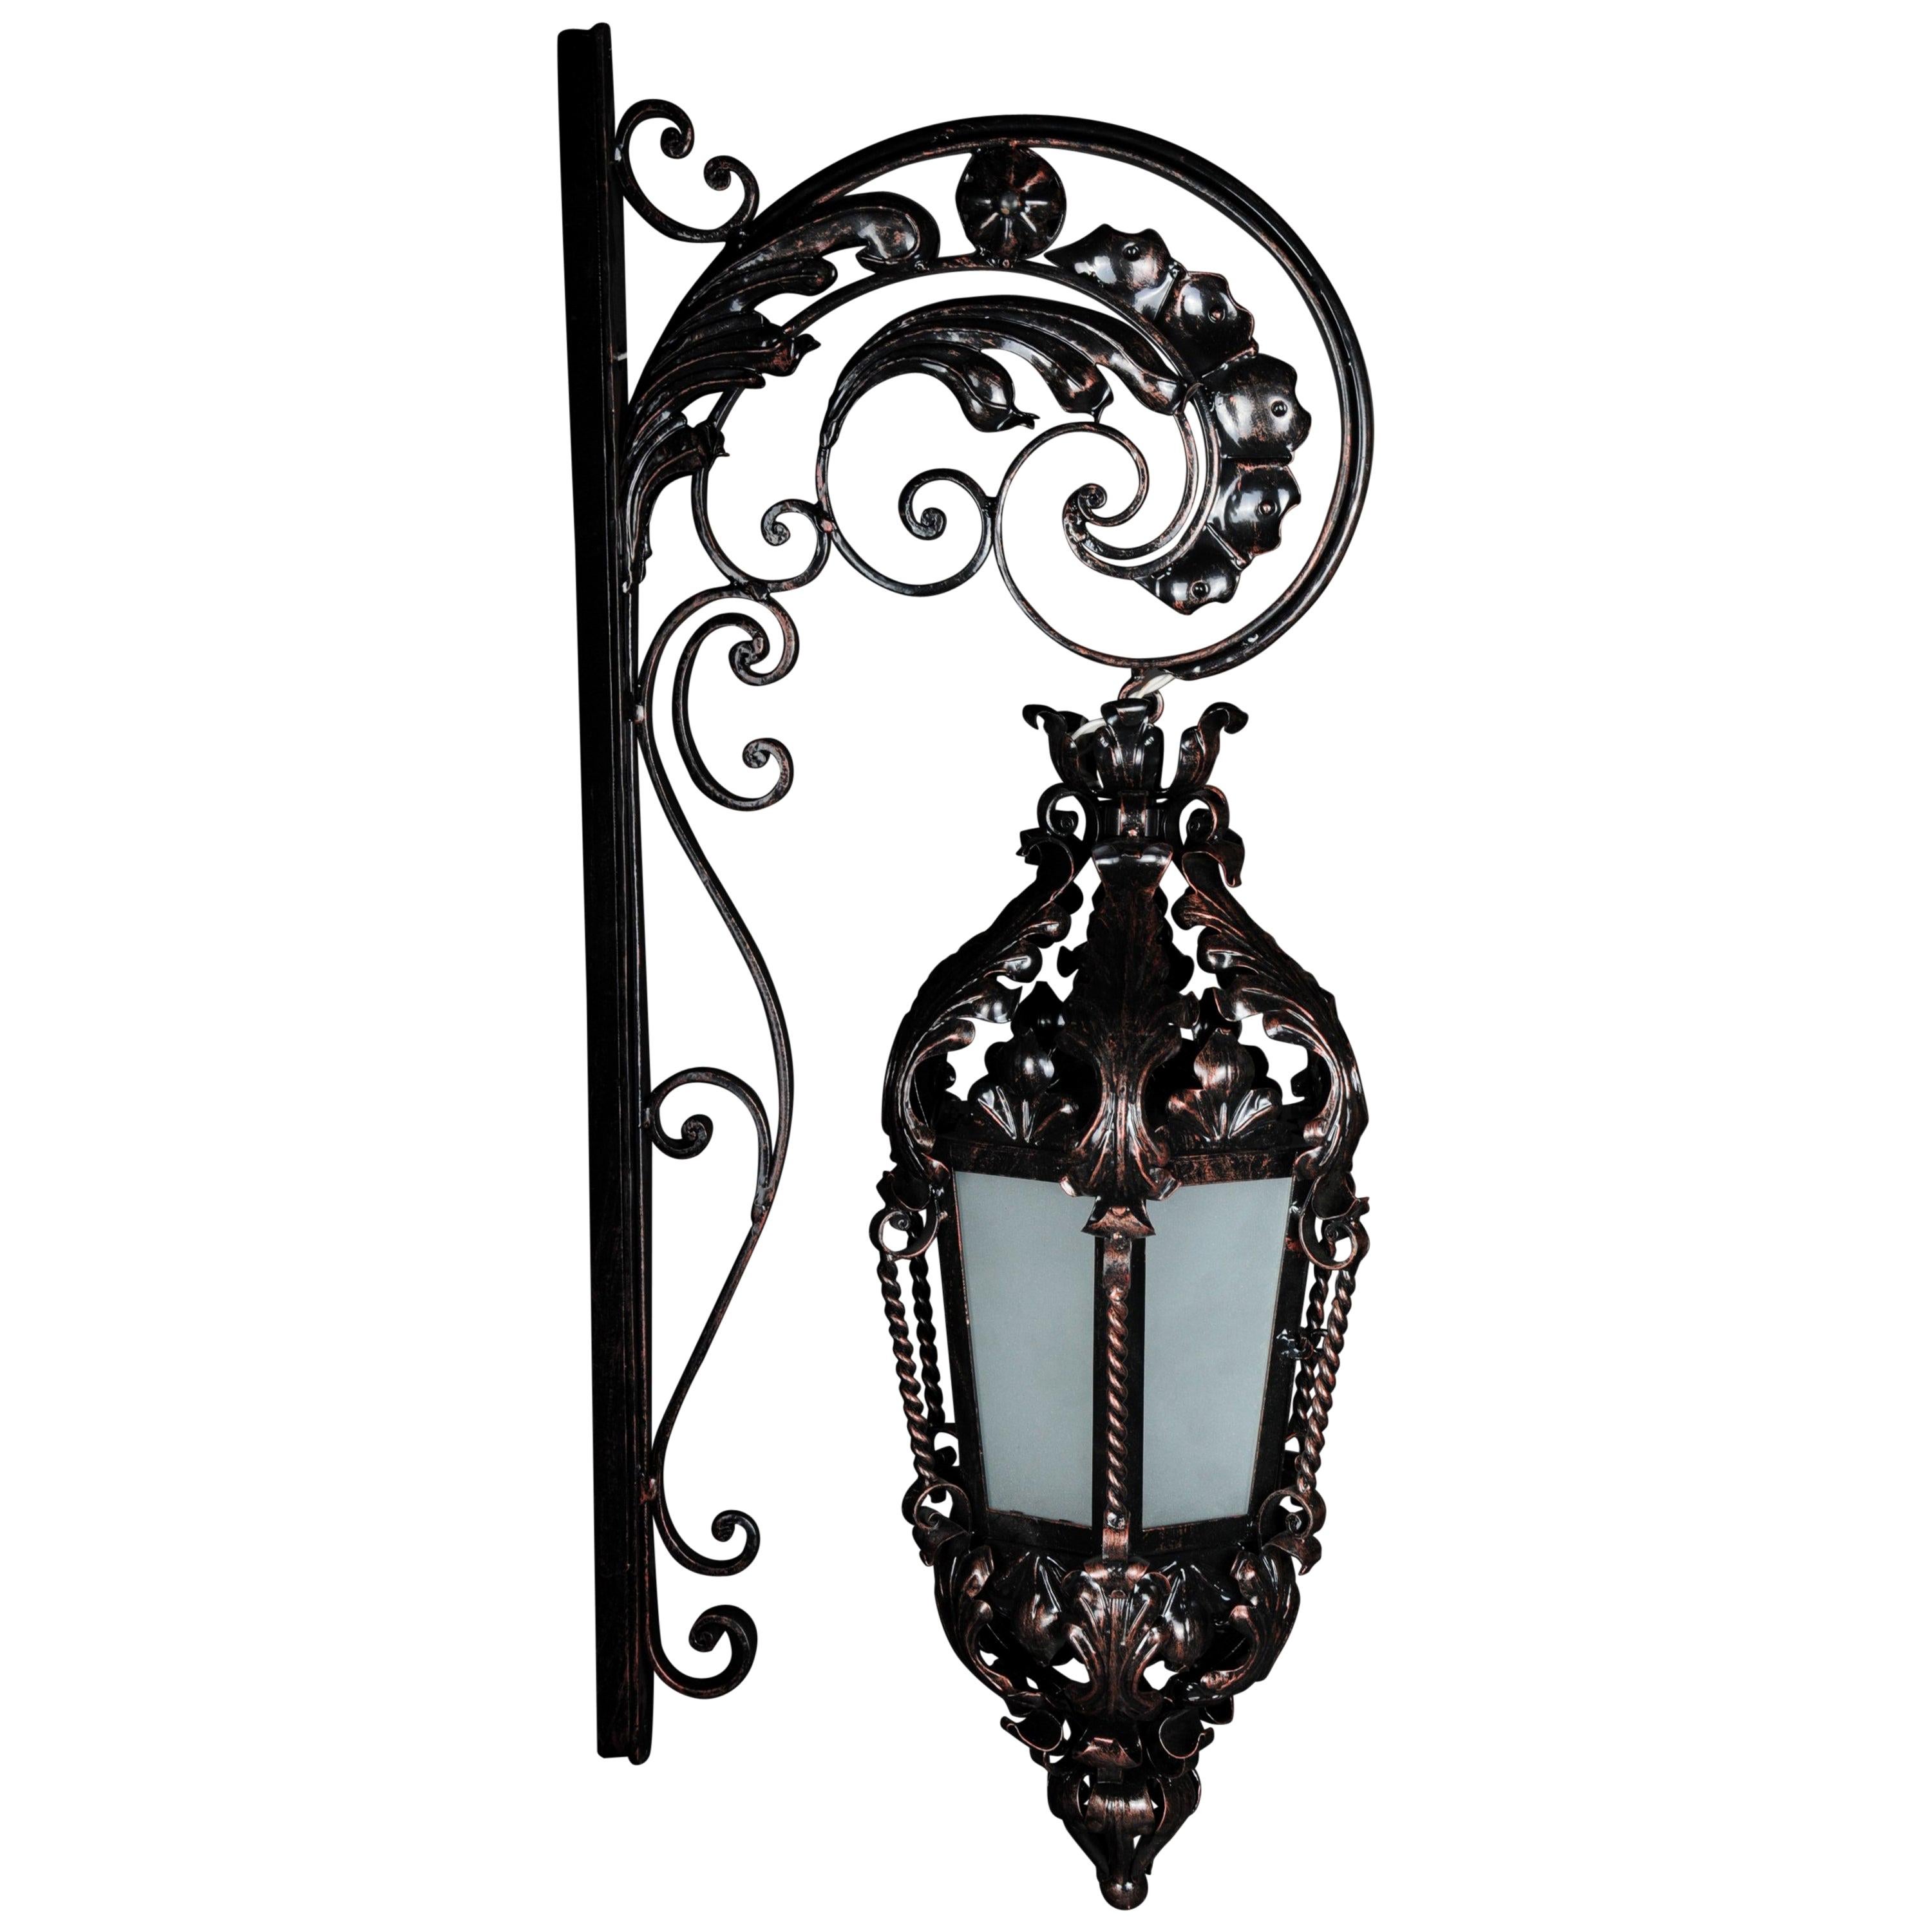 Unique Wrought Iron Hanging Lantern Wall Lamp, Historicism For Sale